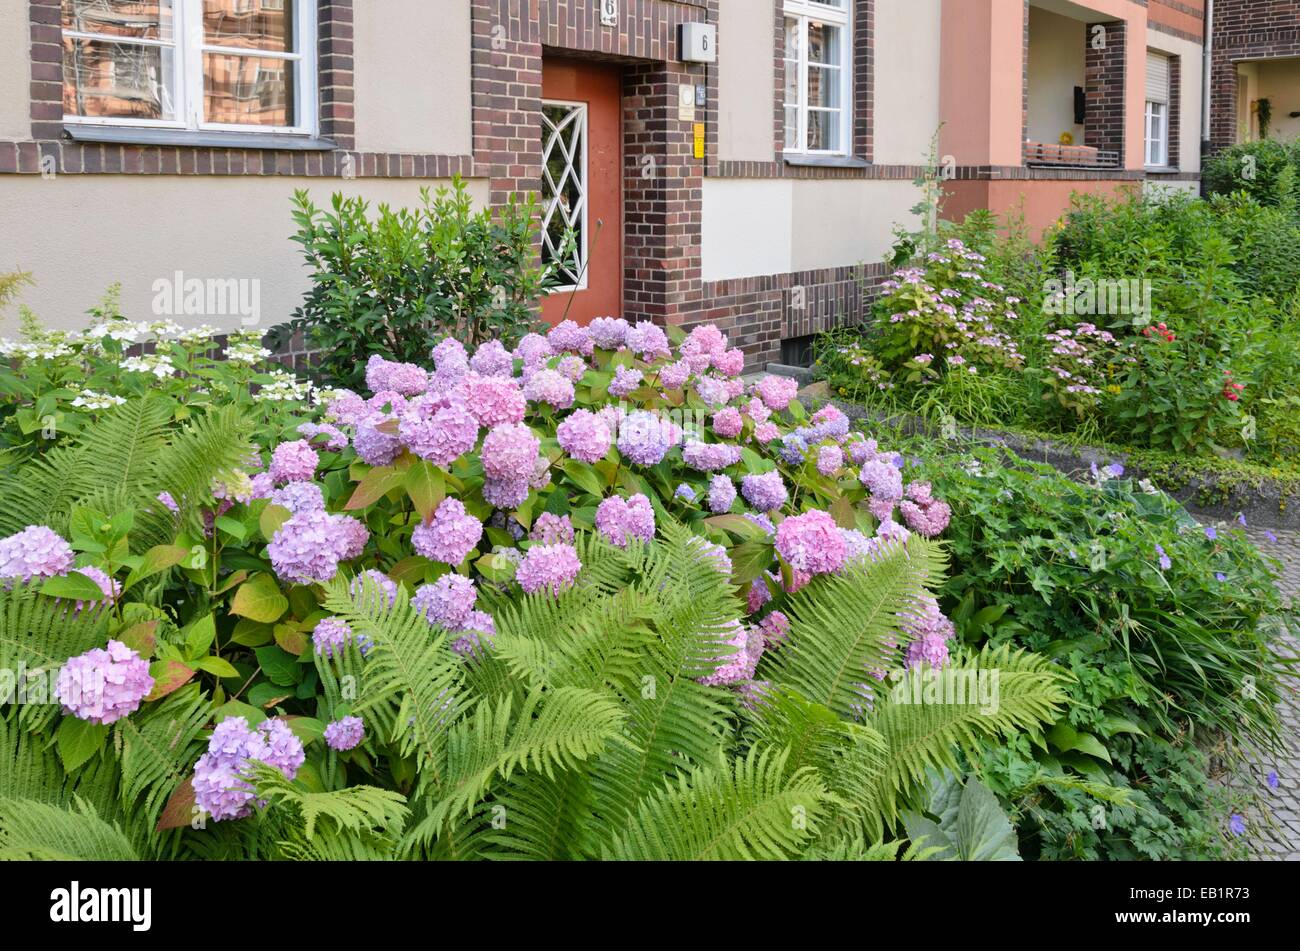 Hydrangea (Hydrangea) in the front garden of an apartment building Stock Photo